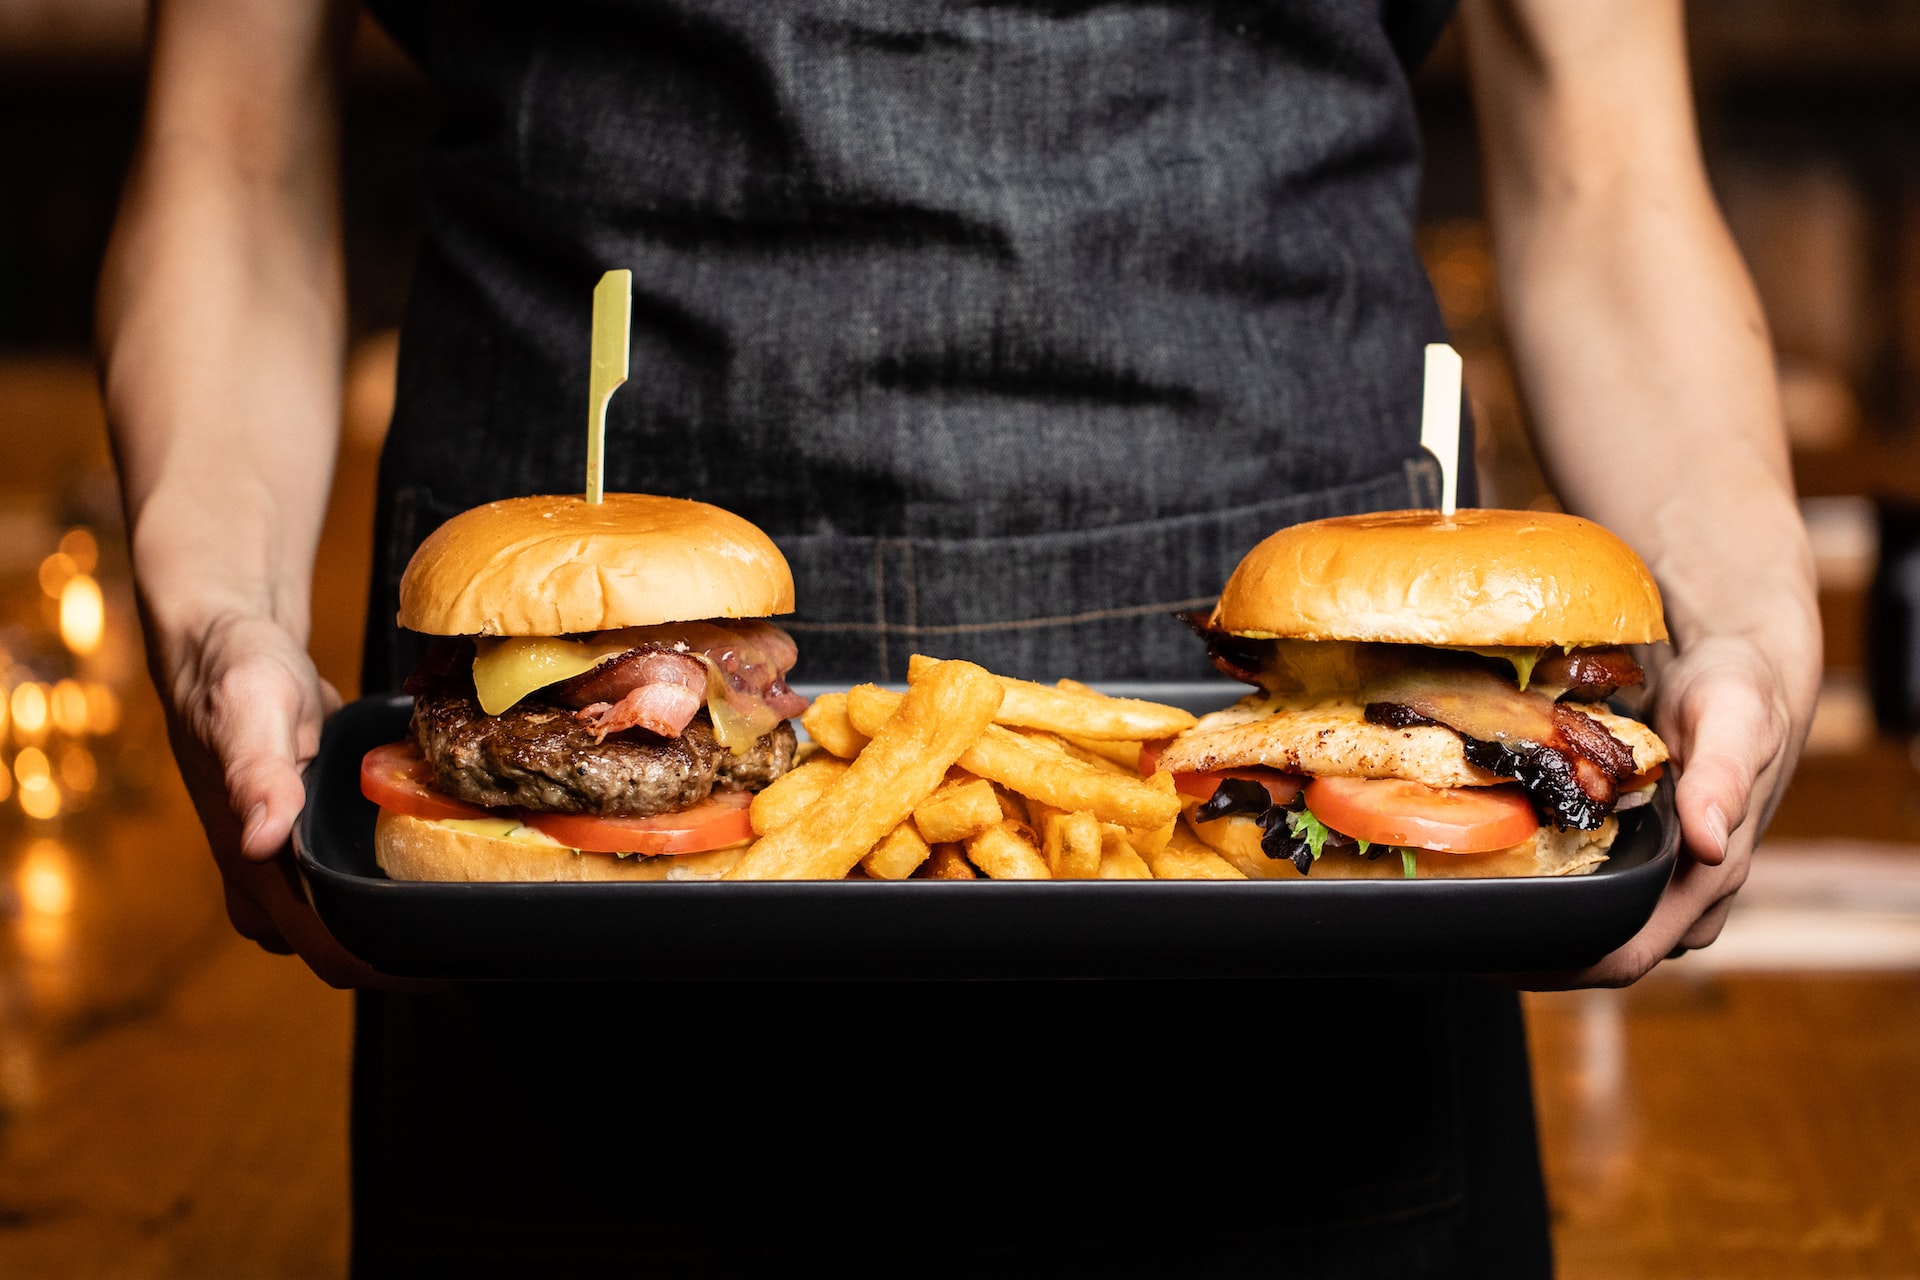 Two hamburgers being held on a tray by a server wearing a black outfit.